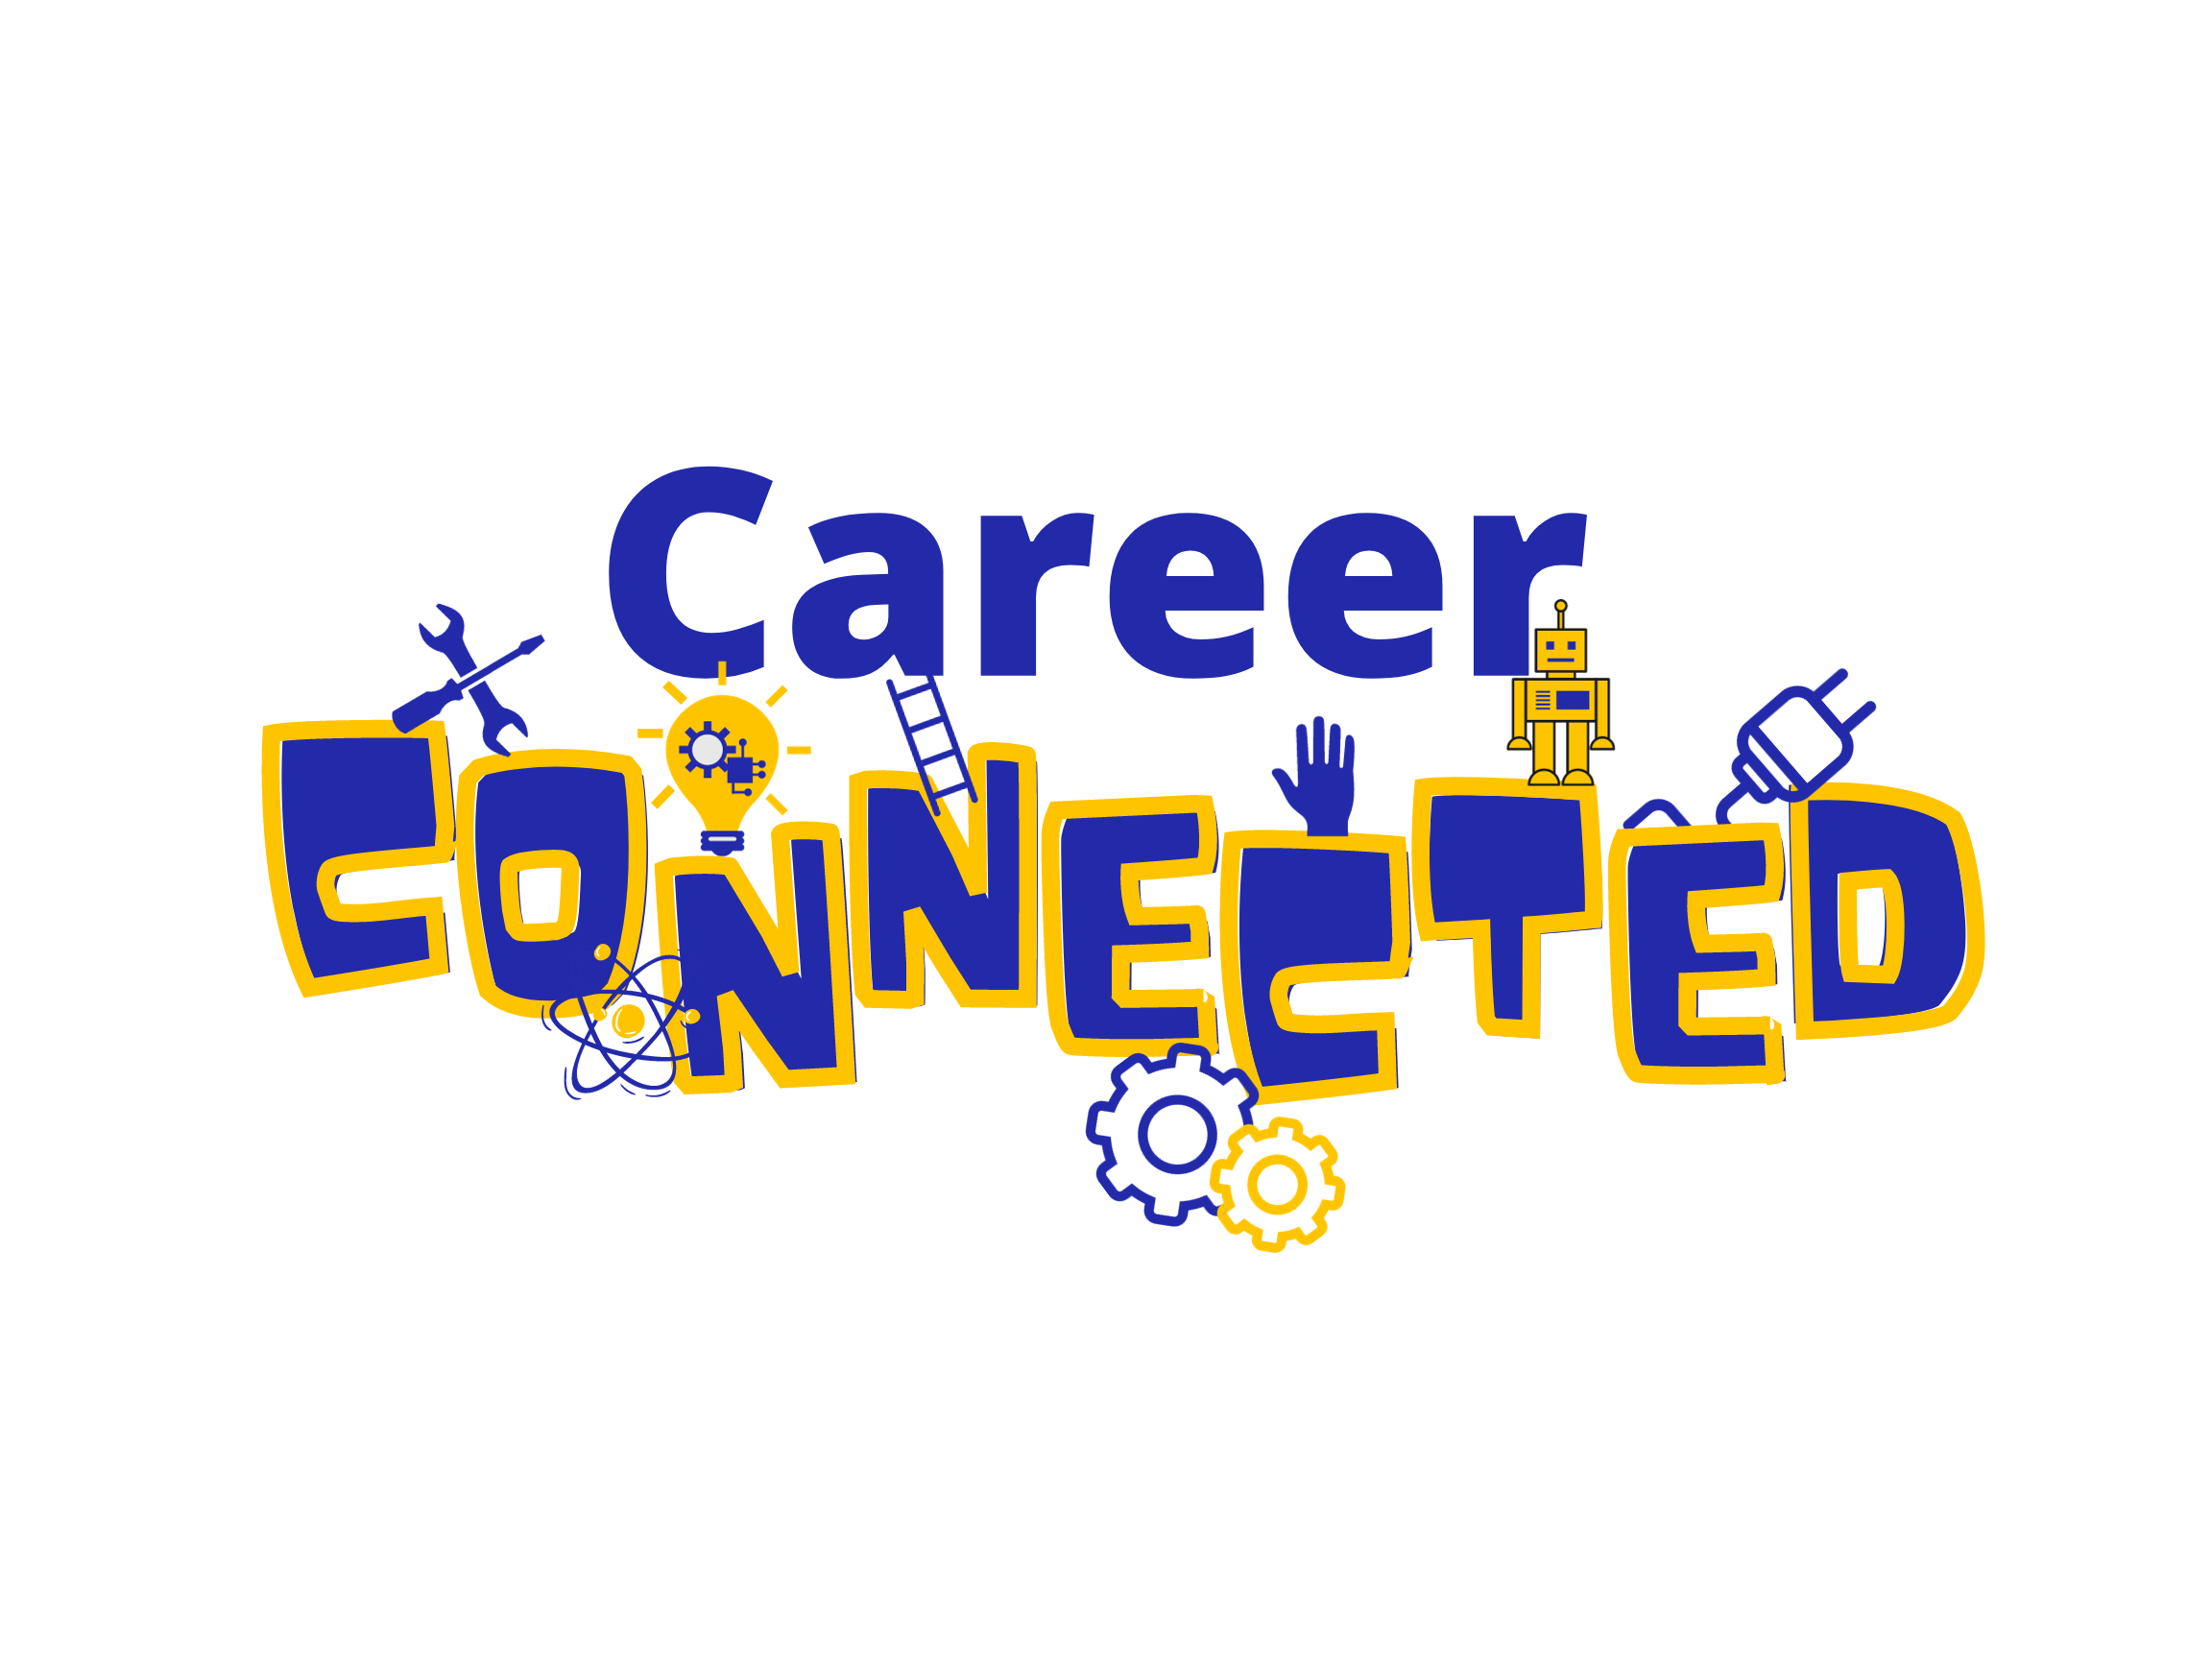 careerconnected